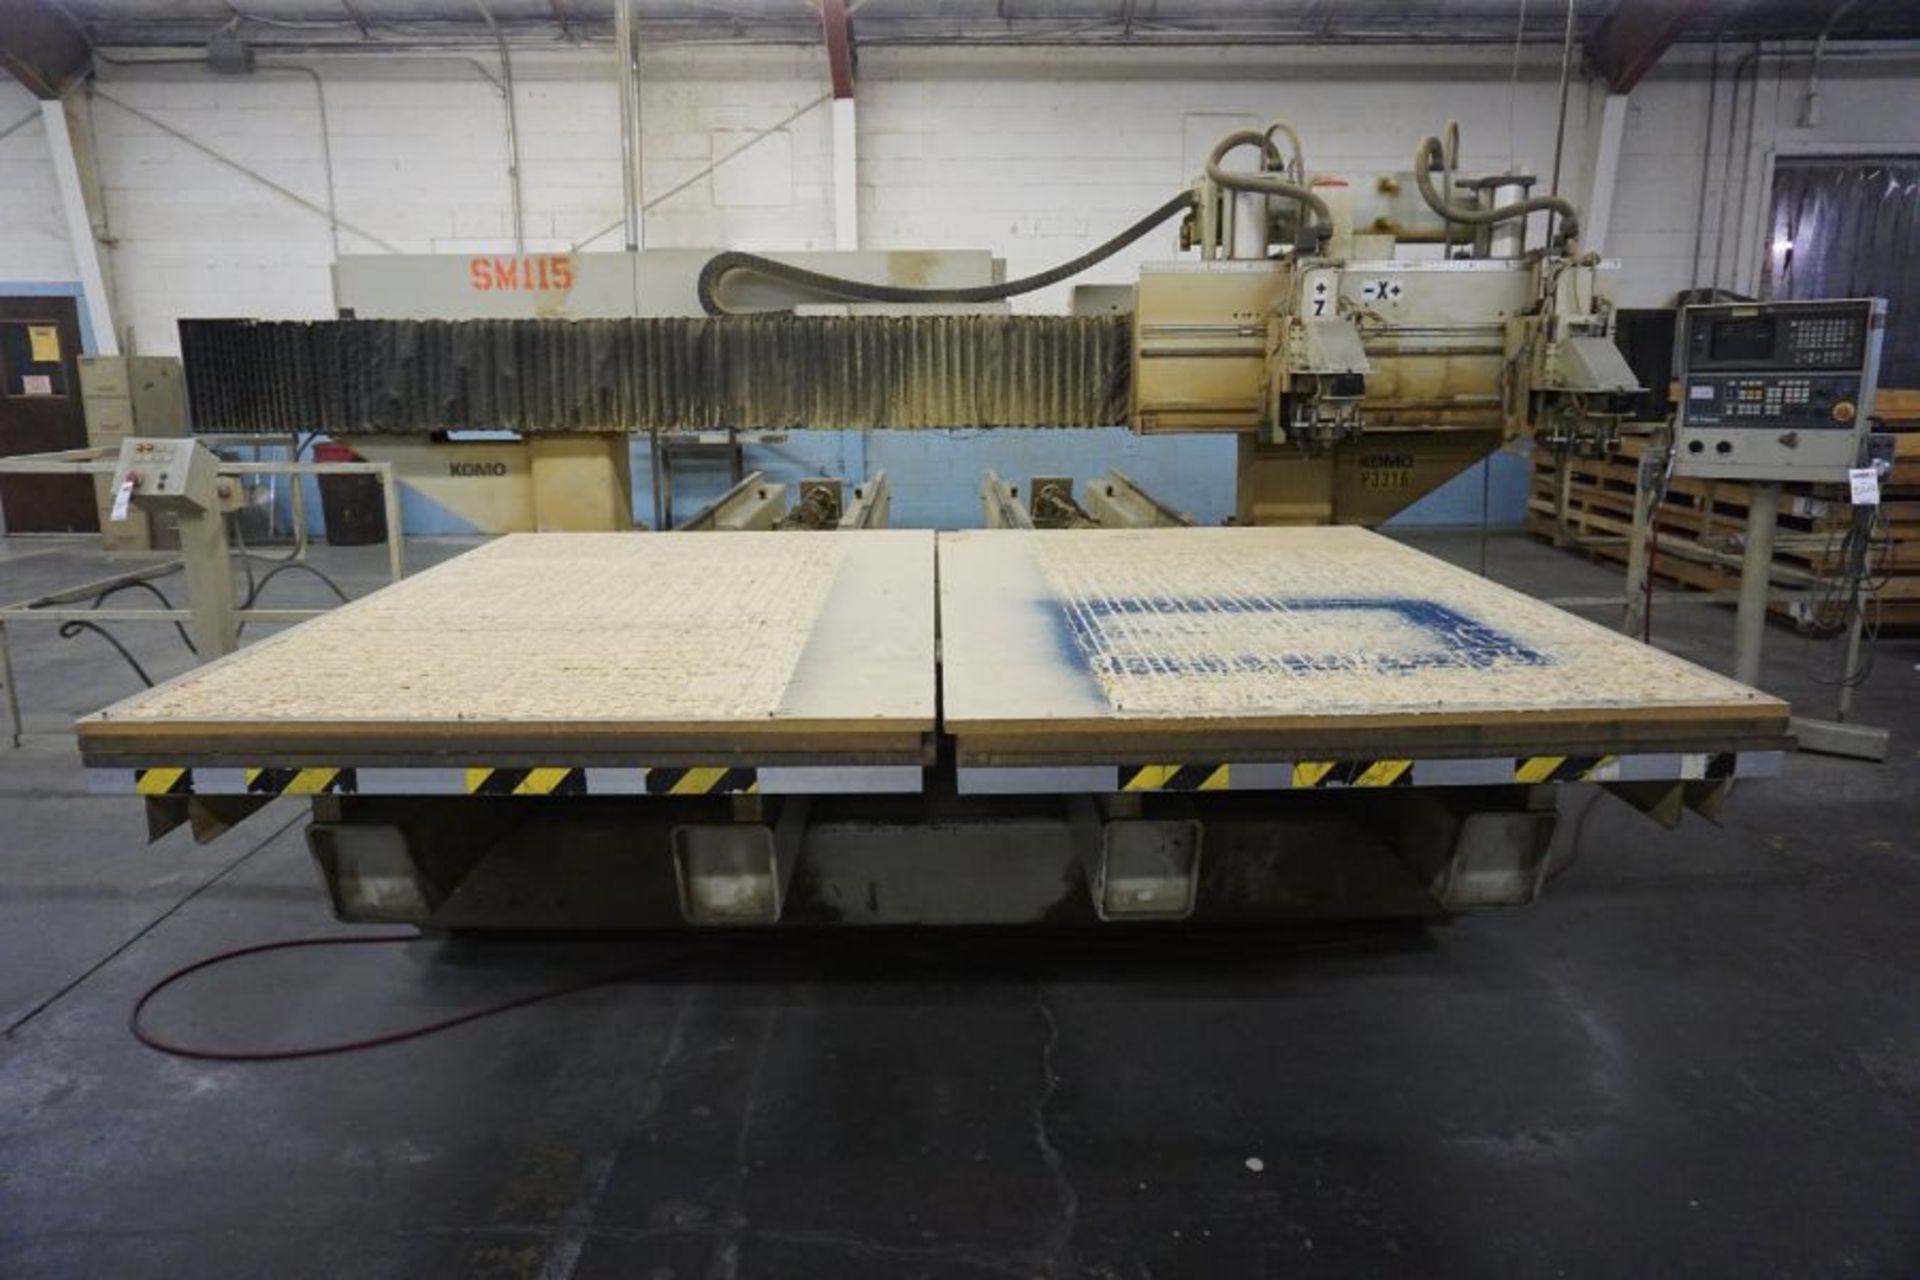 1997 Komo VR1008TT CNC Router, Fanuc 16M Control, Dual 5 x 10' Tabels,*Auctioned from Edgerton, KS* - Image 3 of 12